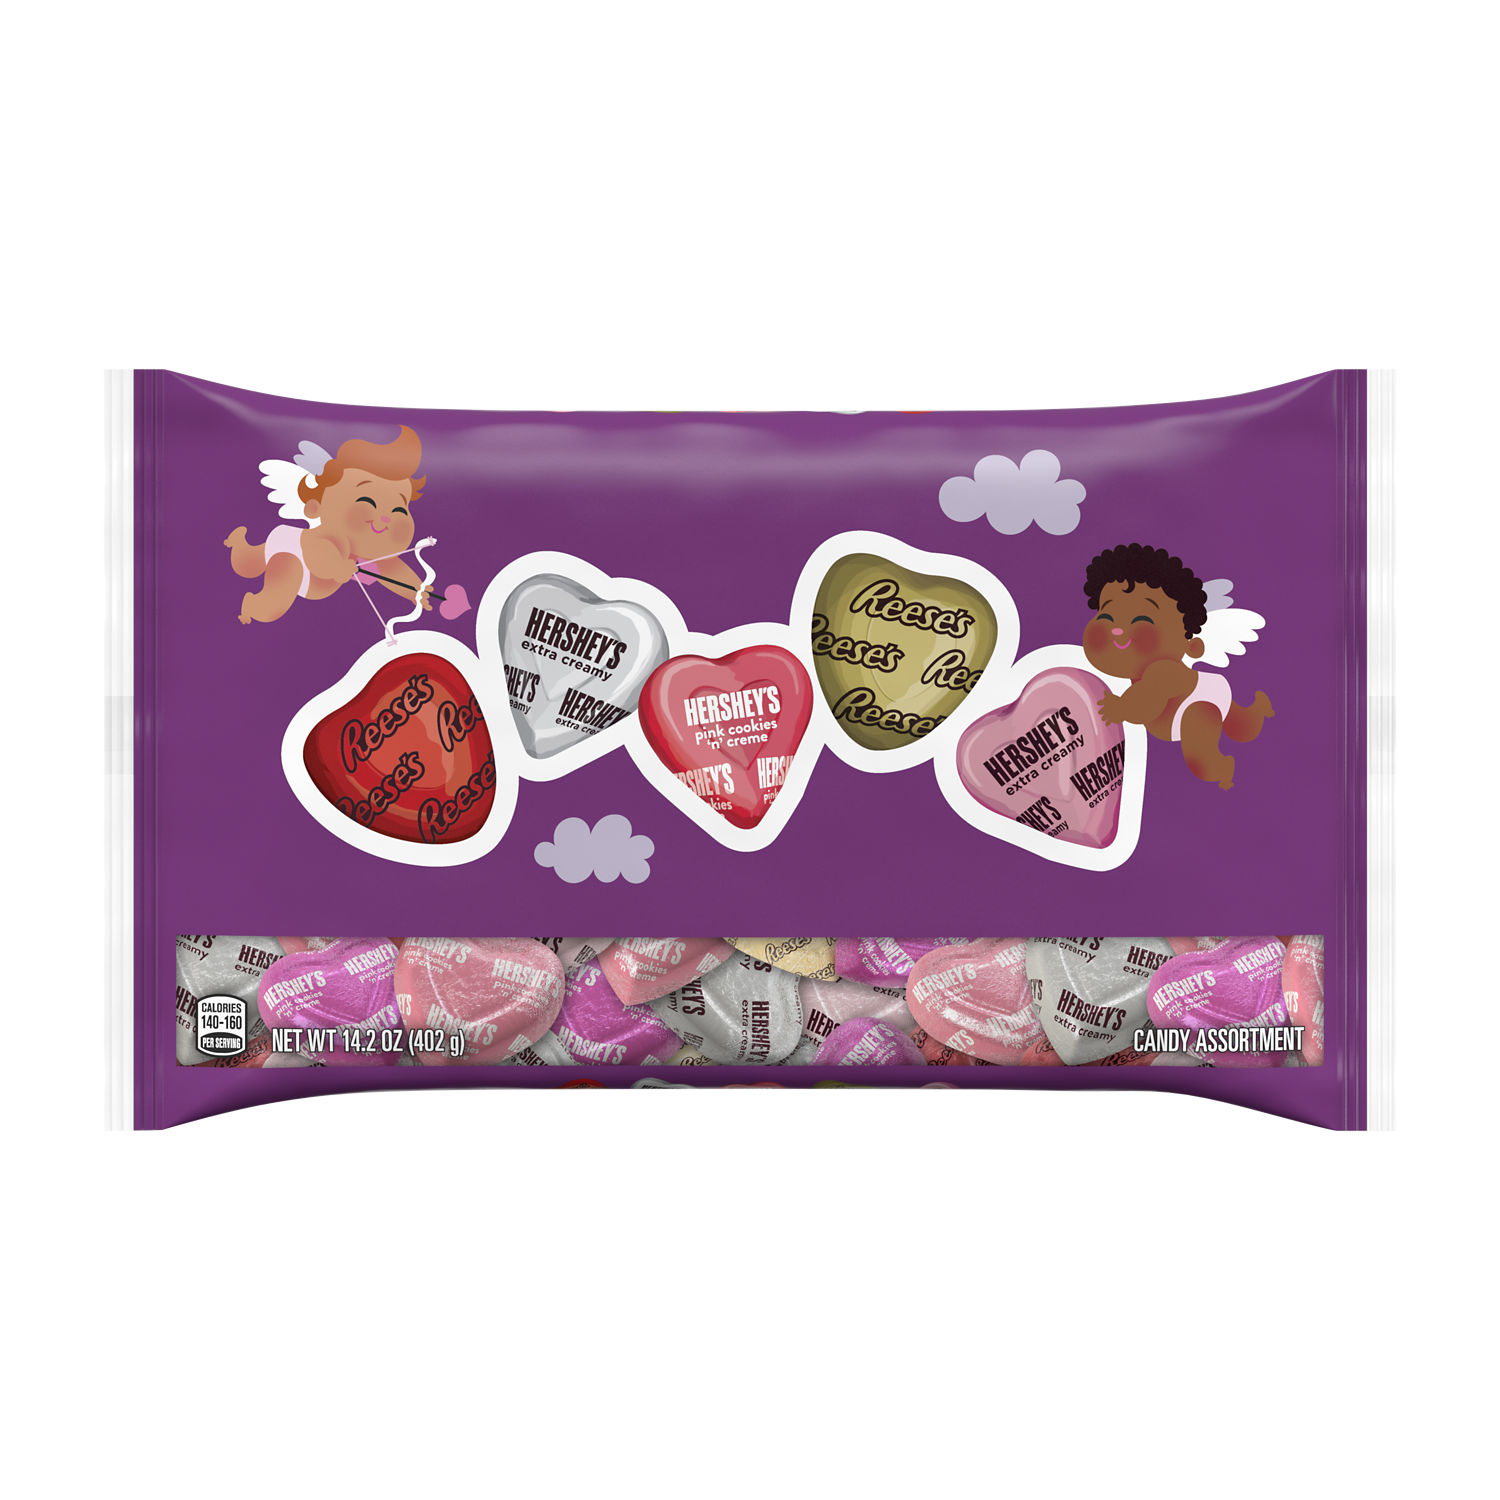 Friends' candy hearts: What the Valentine's Day candy tastes like